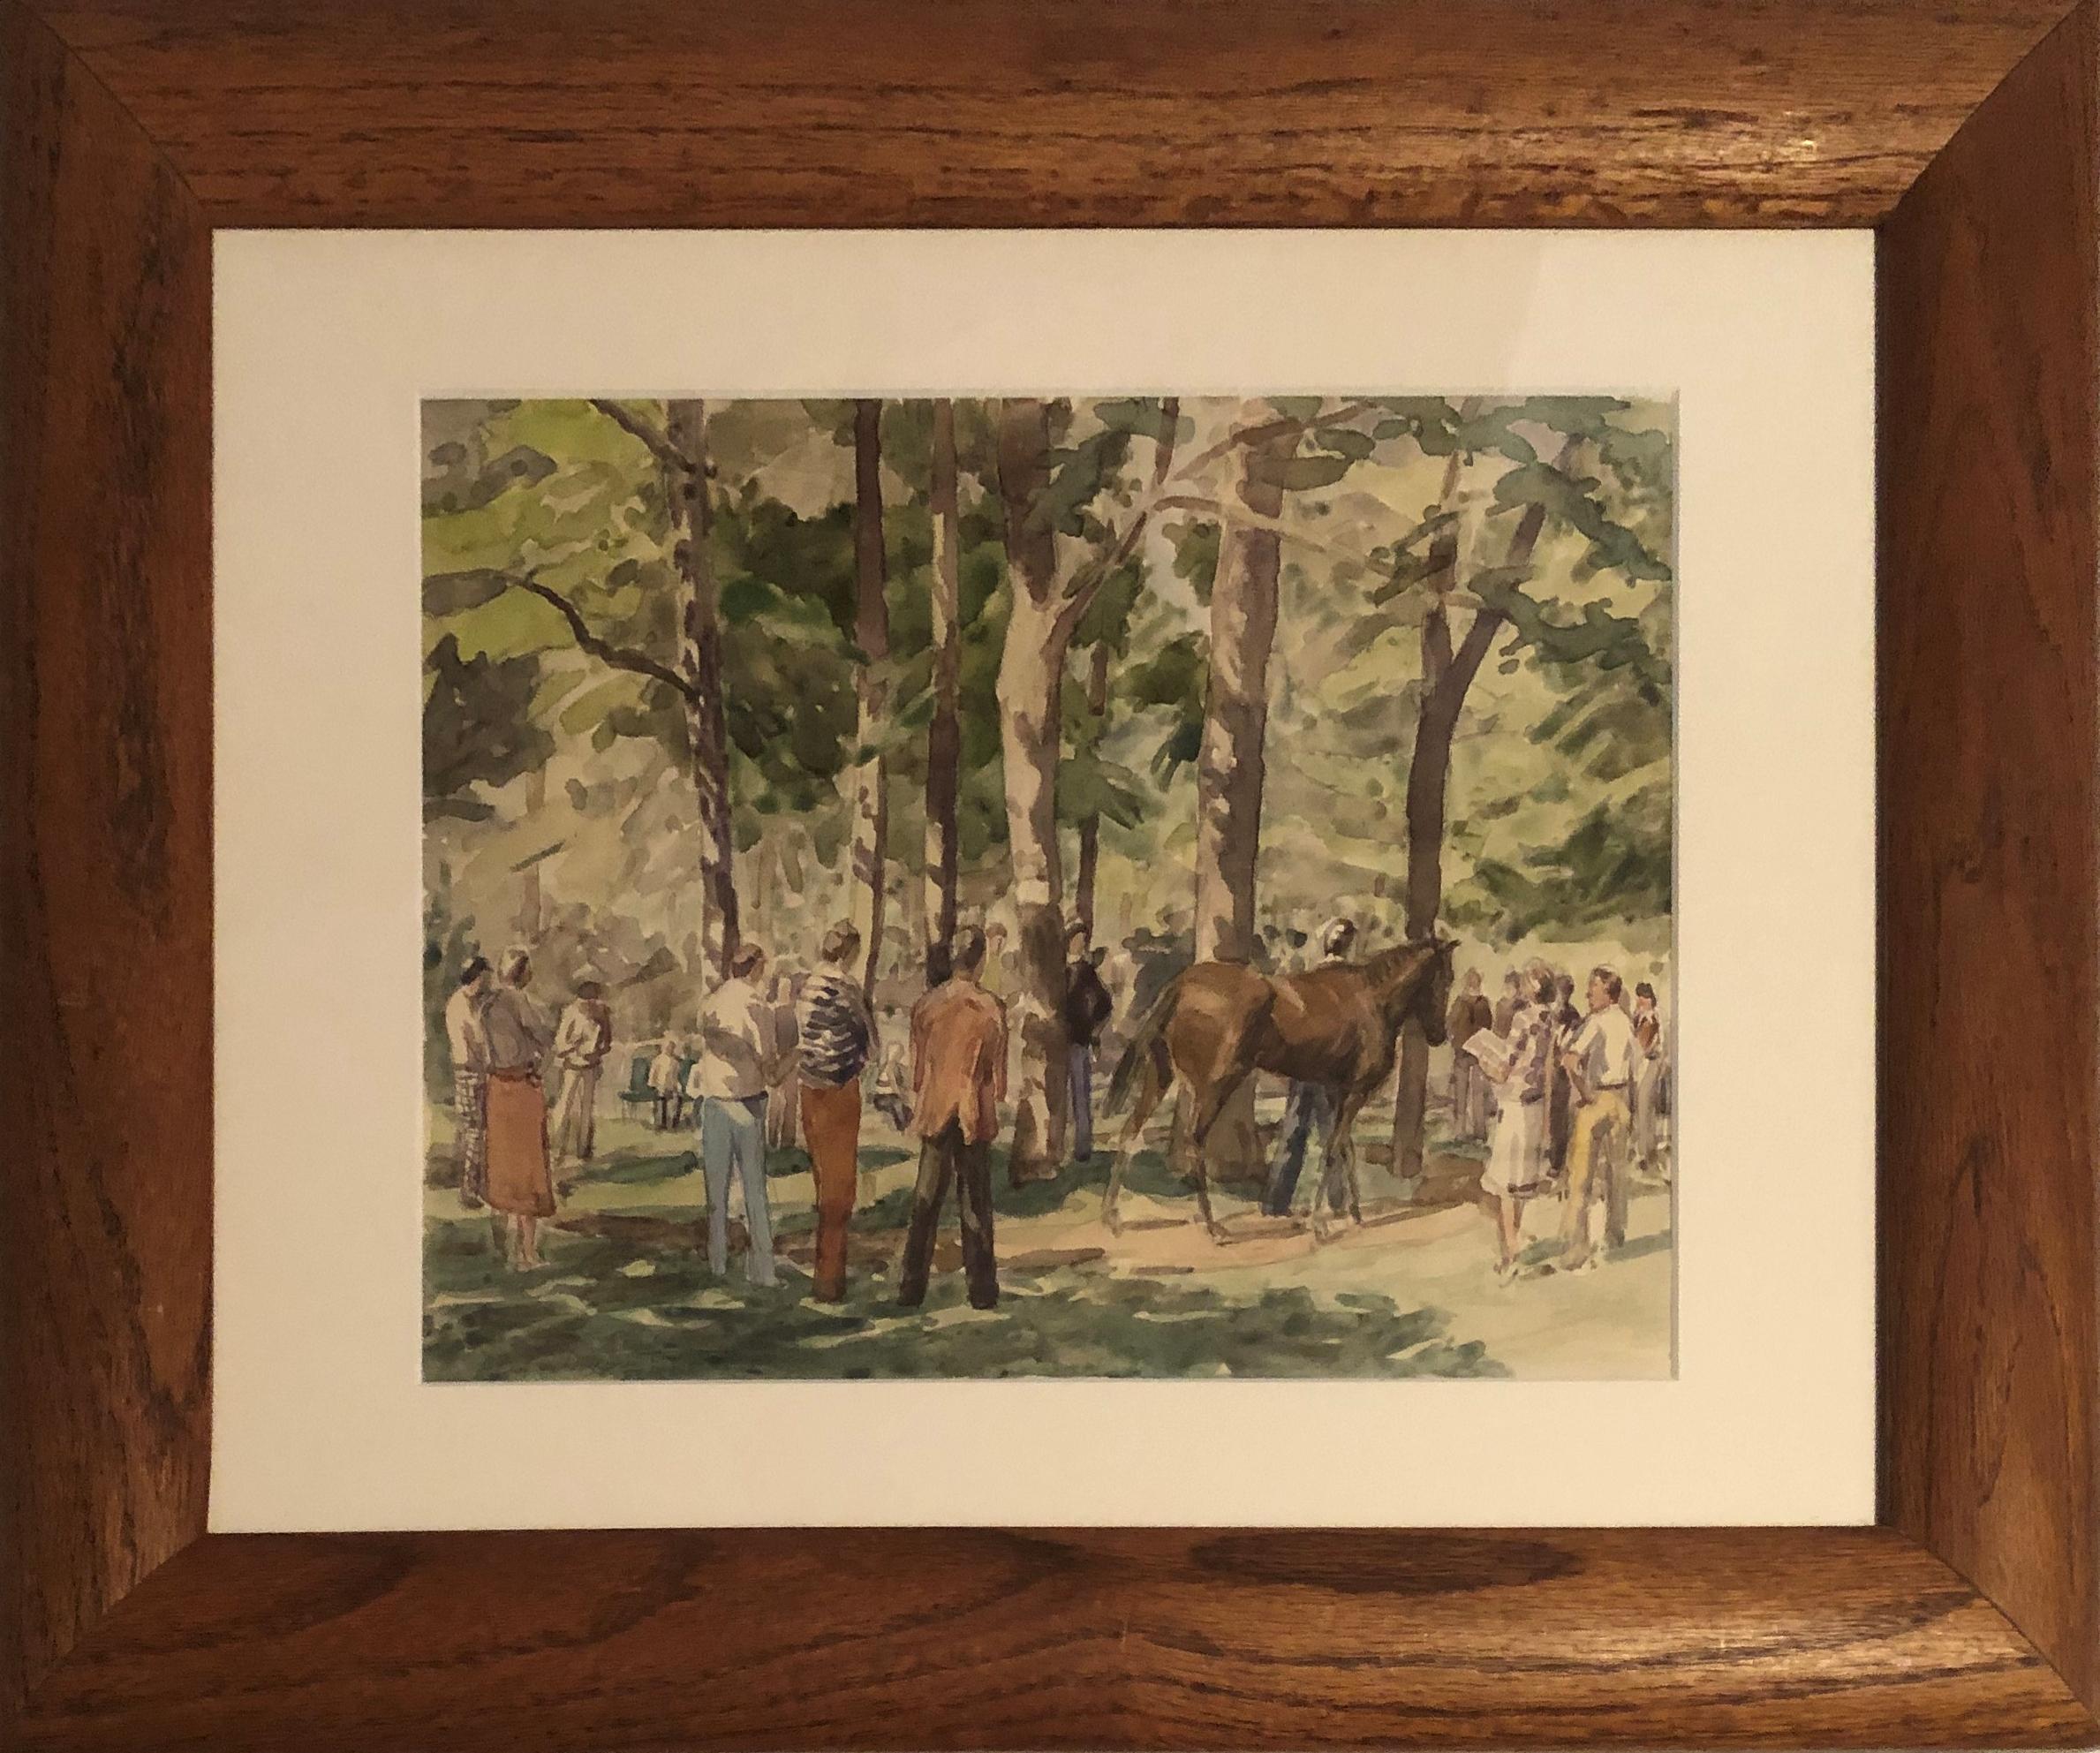 Anne Diggory (b. 1951)
The Racetrack Paddock and Thoroughbred Owners, Saratoga Springs New York, circa 1978
Watercolor on paper
9 x 12 inches
Signed and dated lower left

Provenance:
The artist
Private Collection, California

Anne Diggory lives in